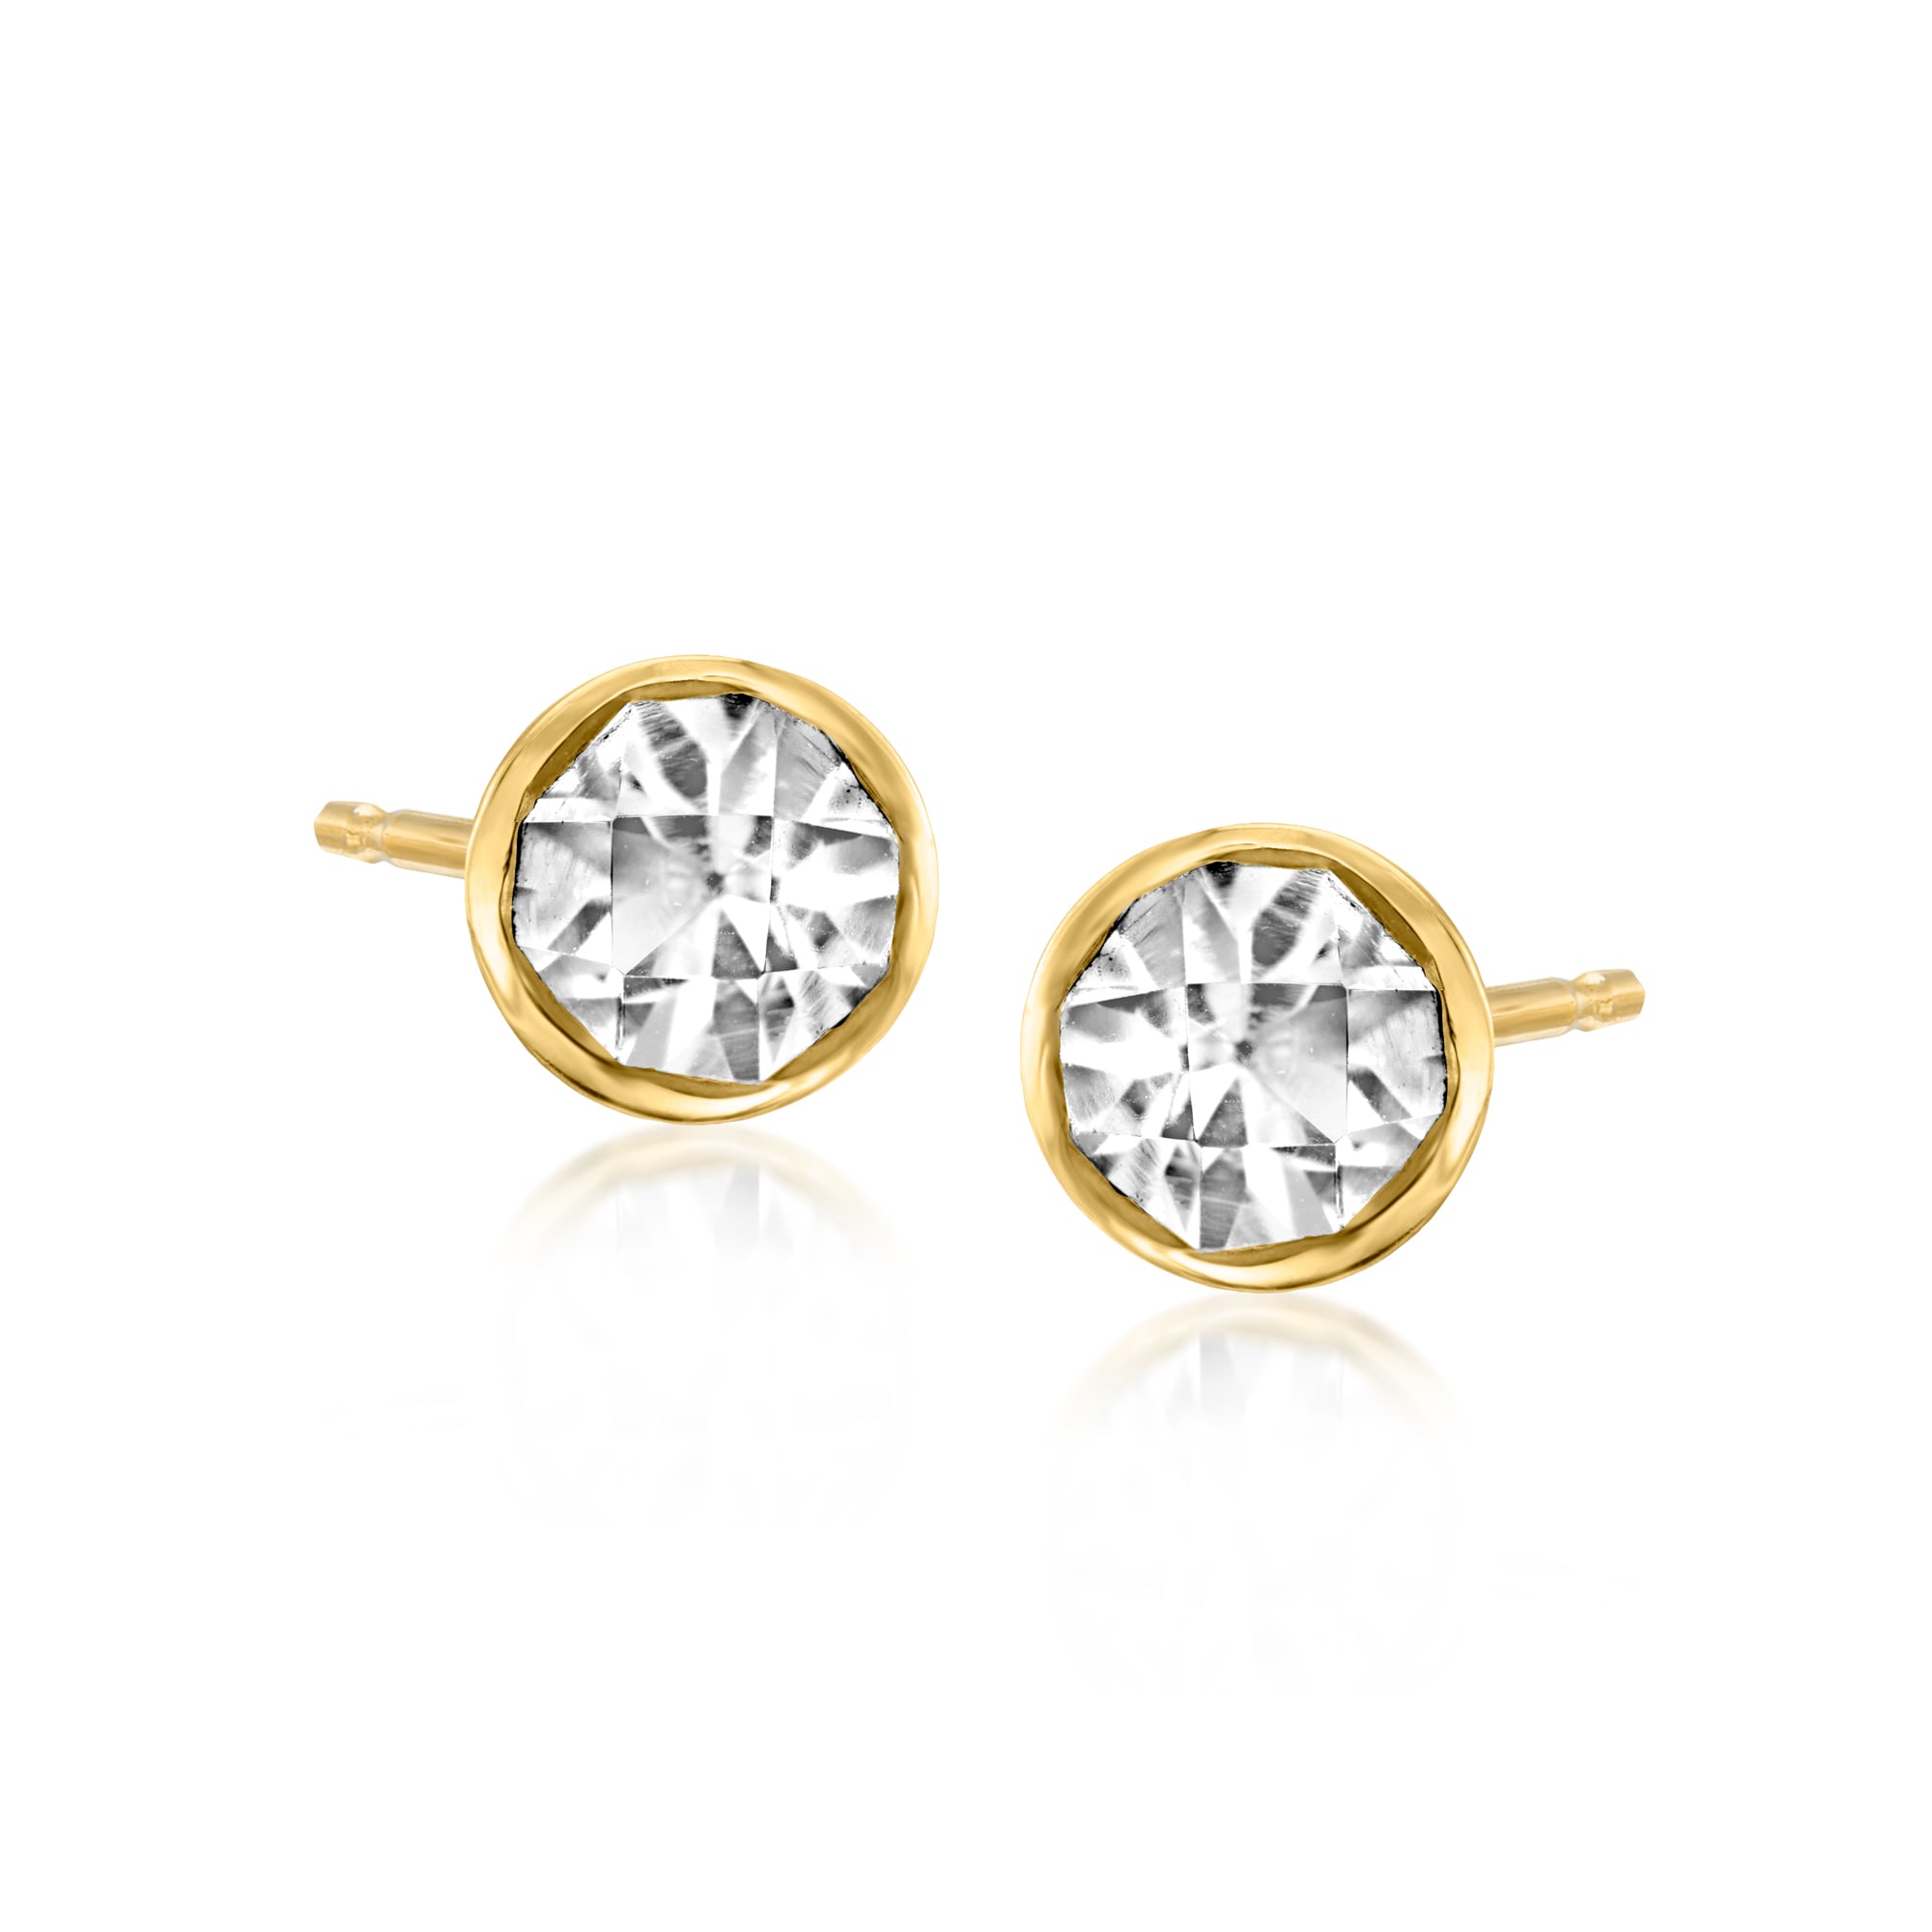 Ct T W White Sapphire Stud Earrings In Kt Yellow Gold Ross Simons